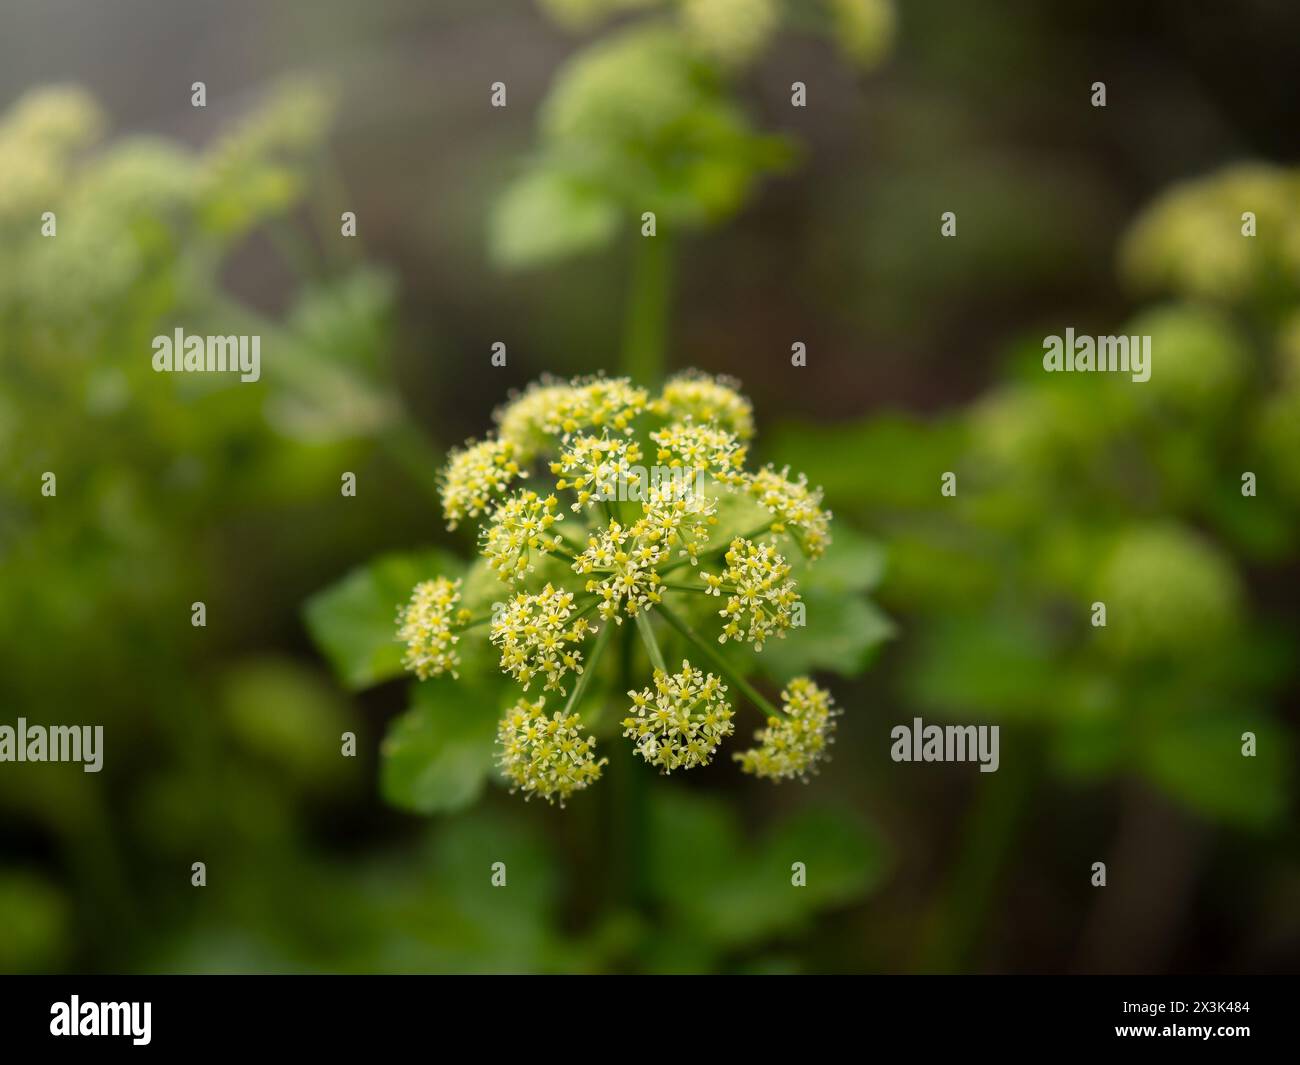 Embarking on a mystical journey through nature, surrounded by smoking pollen plants Stock Photo